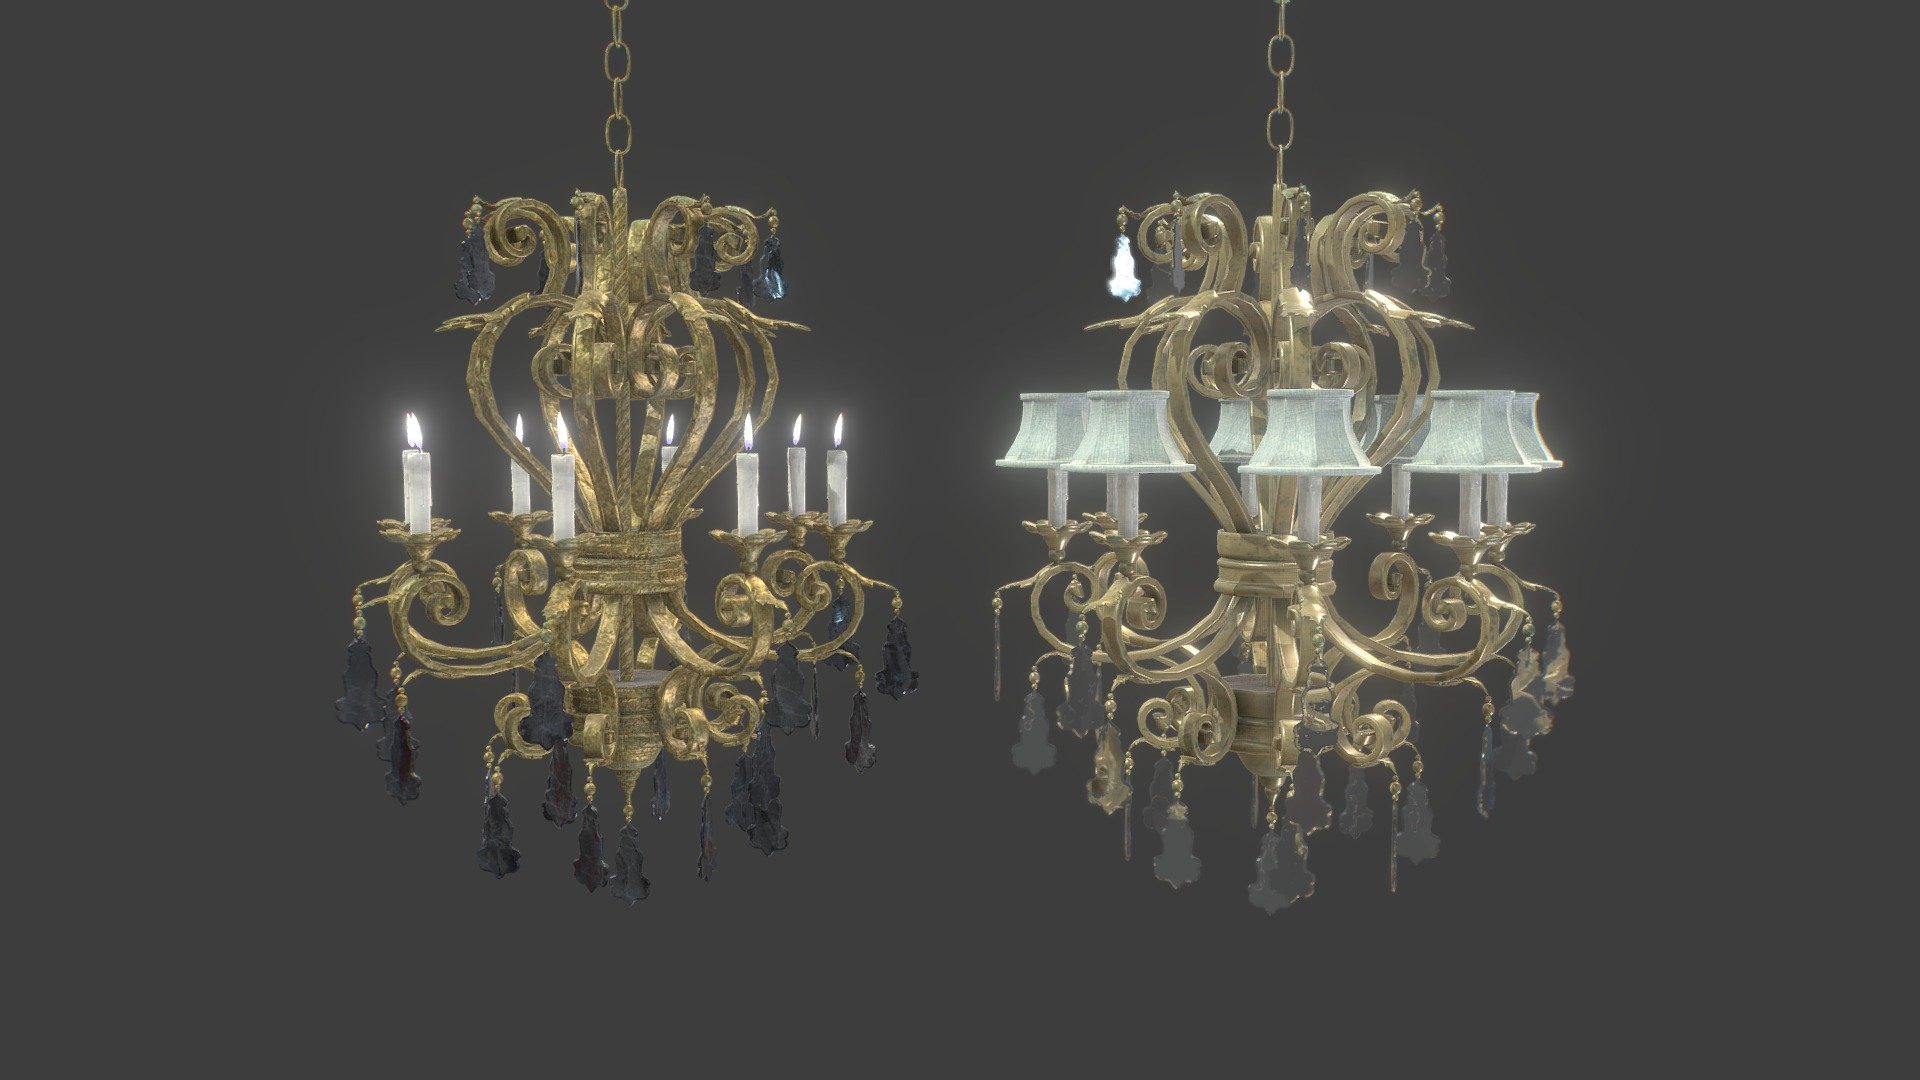 Check out my website for more products and better deals! &gt;&gt; SM5 by Heledahn &lt;&lt;


This is a digital 3d model of a Victorian/Gothic style chandelier. It comes with two color variations: Victorian and Fantasy.

The Victorian variation has small cloth lamp shades covering the candles, and clean glass pendants hanging from the arms. 

The Fantasy variation has a rough metal with a hand-made quality to it and a stronger antique look. This variations carries no shades, and leaves the candles exposed. The pendants are black onyx stones cut in a rough uneven way.

(TIF HEIGHT MAP TEXTURES ONLY FOR SALE IN MY WEBSITE 🔼)

This model can be used for any Period themed render project, used either as a background prop, or as a closeup prop due to its high detail and visual quality.

This product will achieve realistic results in your rendering projects and animations, being greatly suited for close-ups due to their high quality topology and PBR shading 3d model